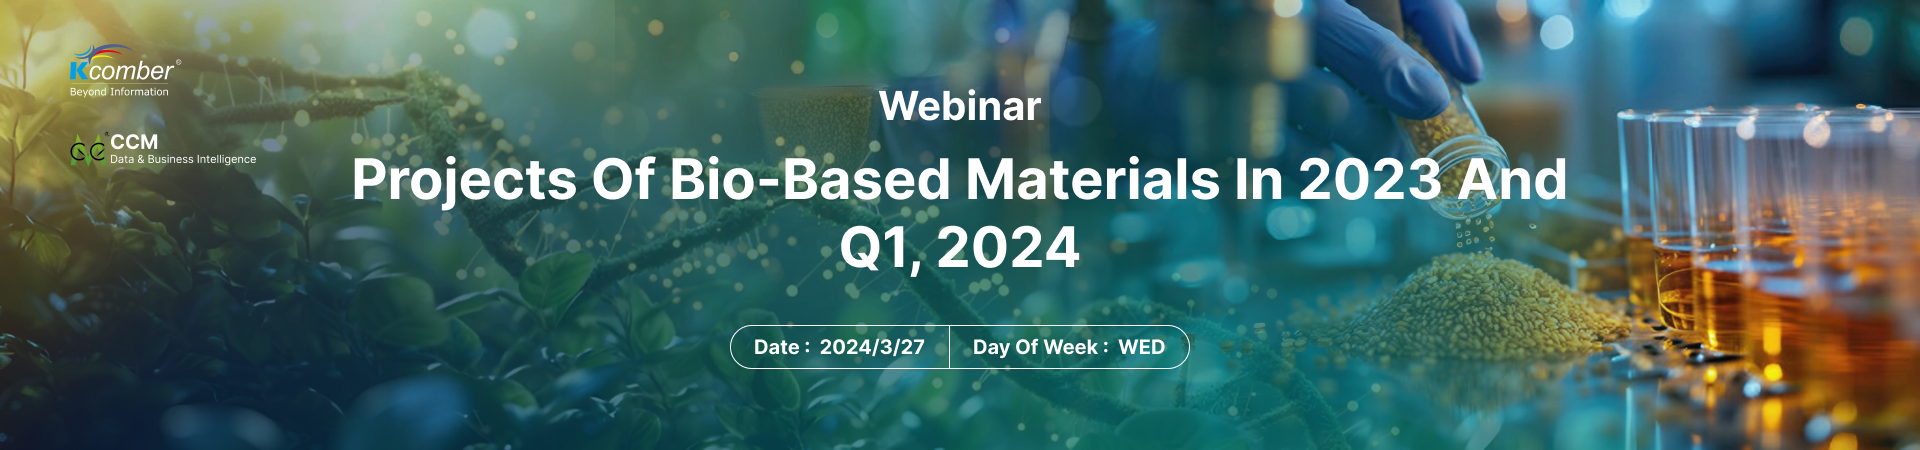 Projects Review of Bio-based materials in 2023 and Q1, 2024